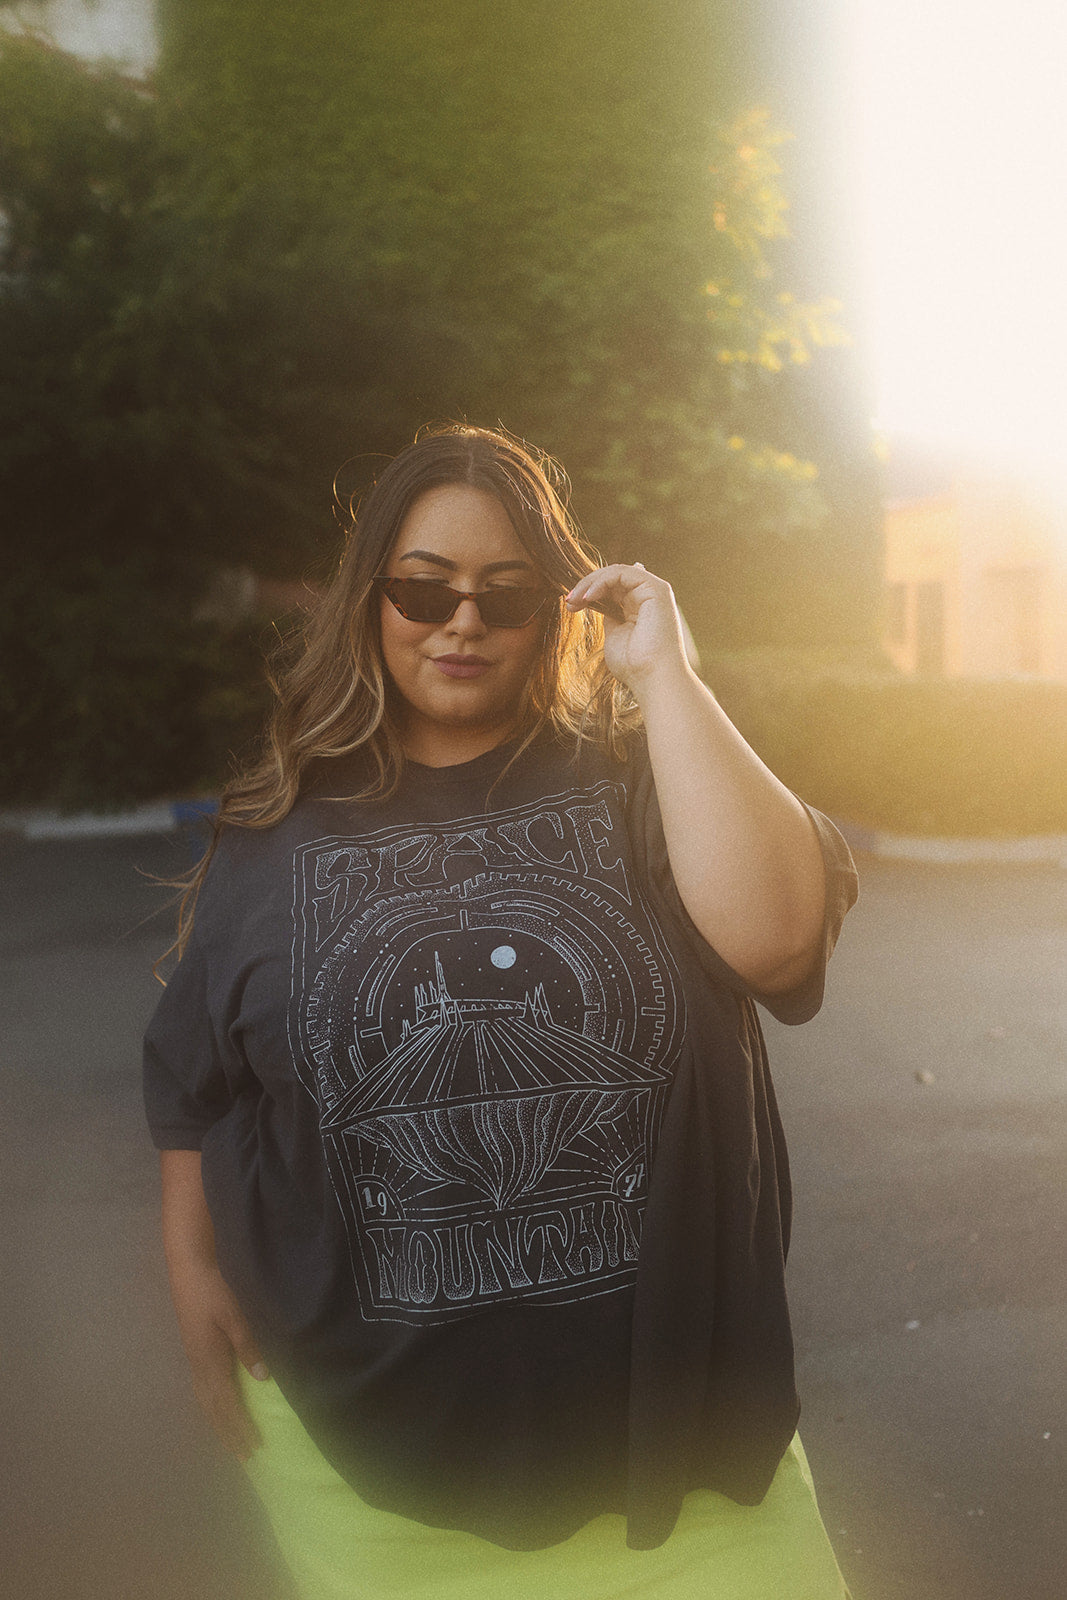 The Space Oversized Tee in Vintage Black